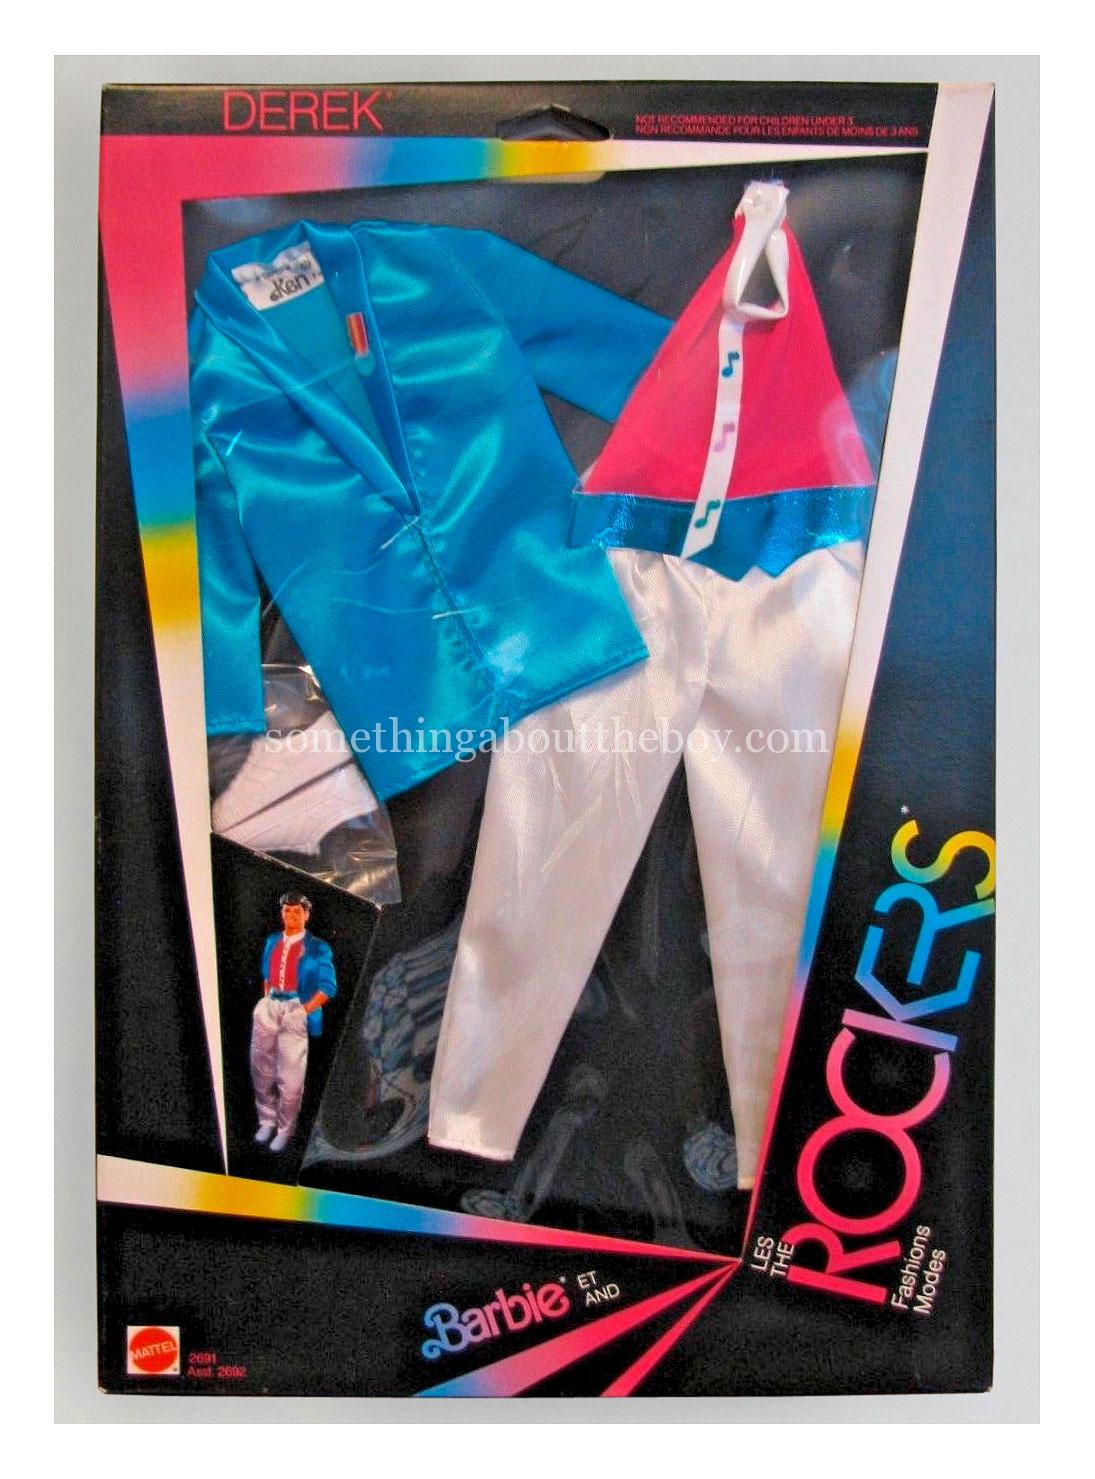 1986 #2691 Rock Stars Fashions (Canadian version) in original packaging